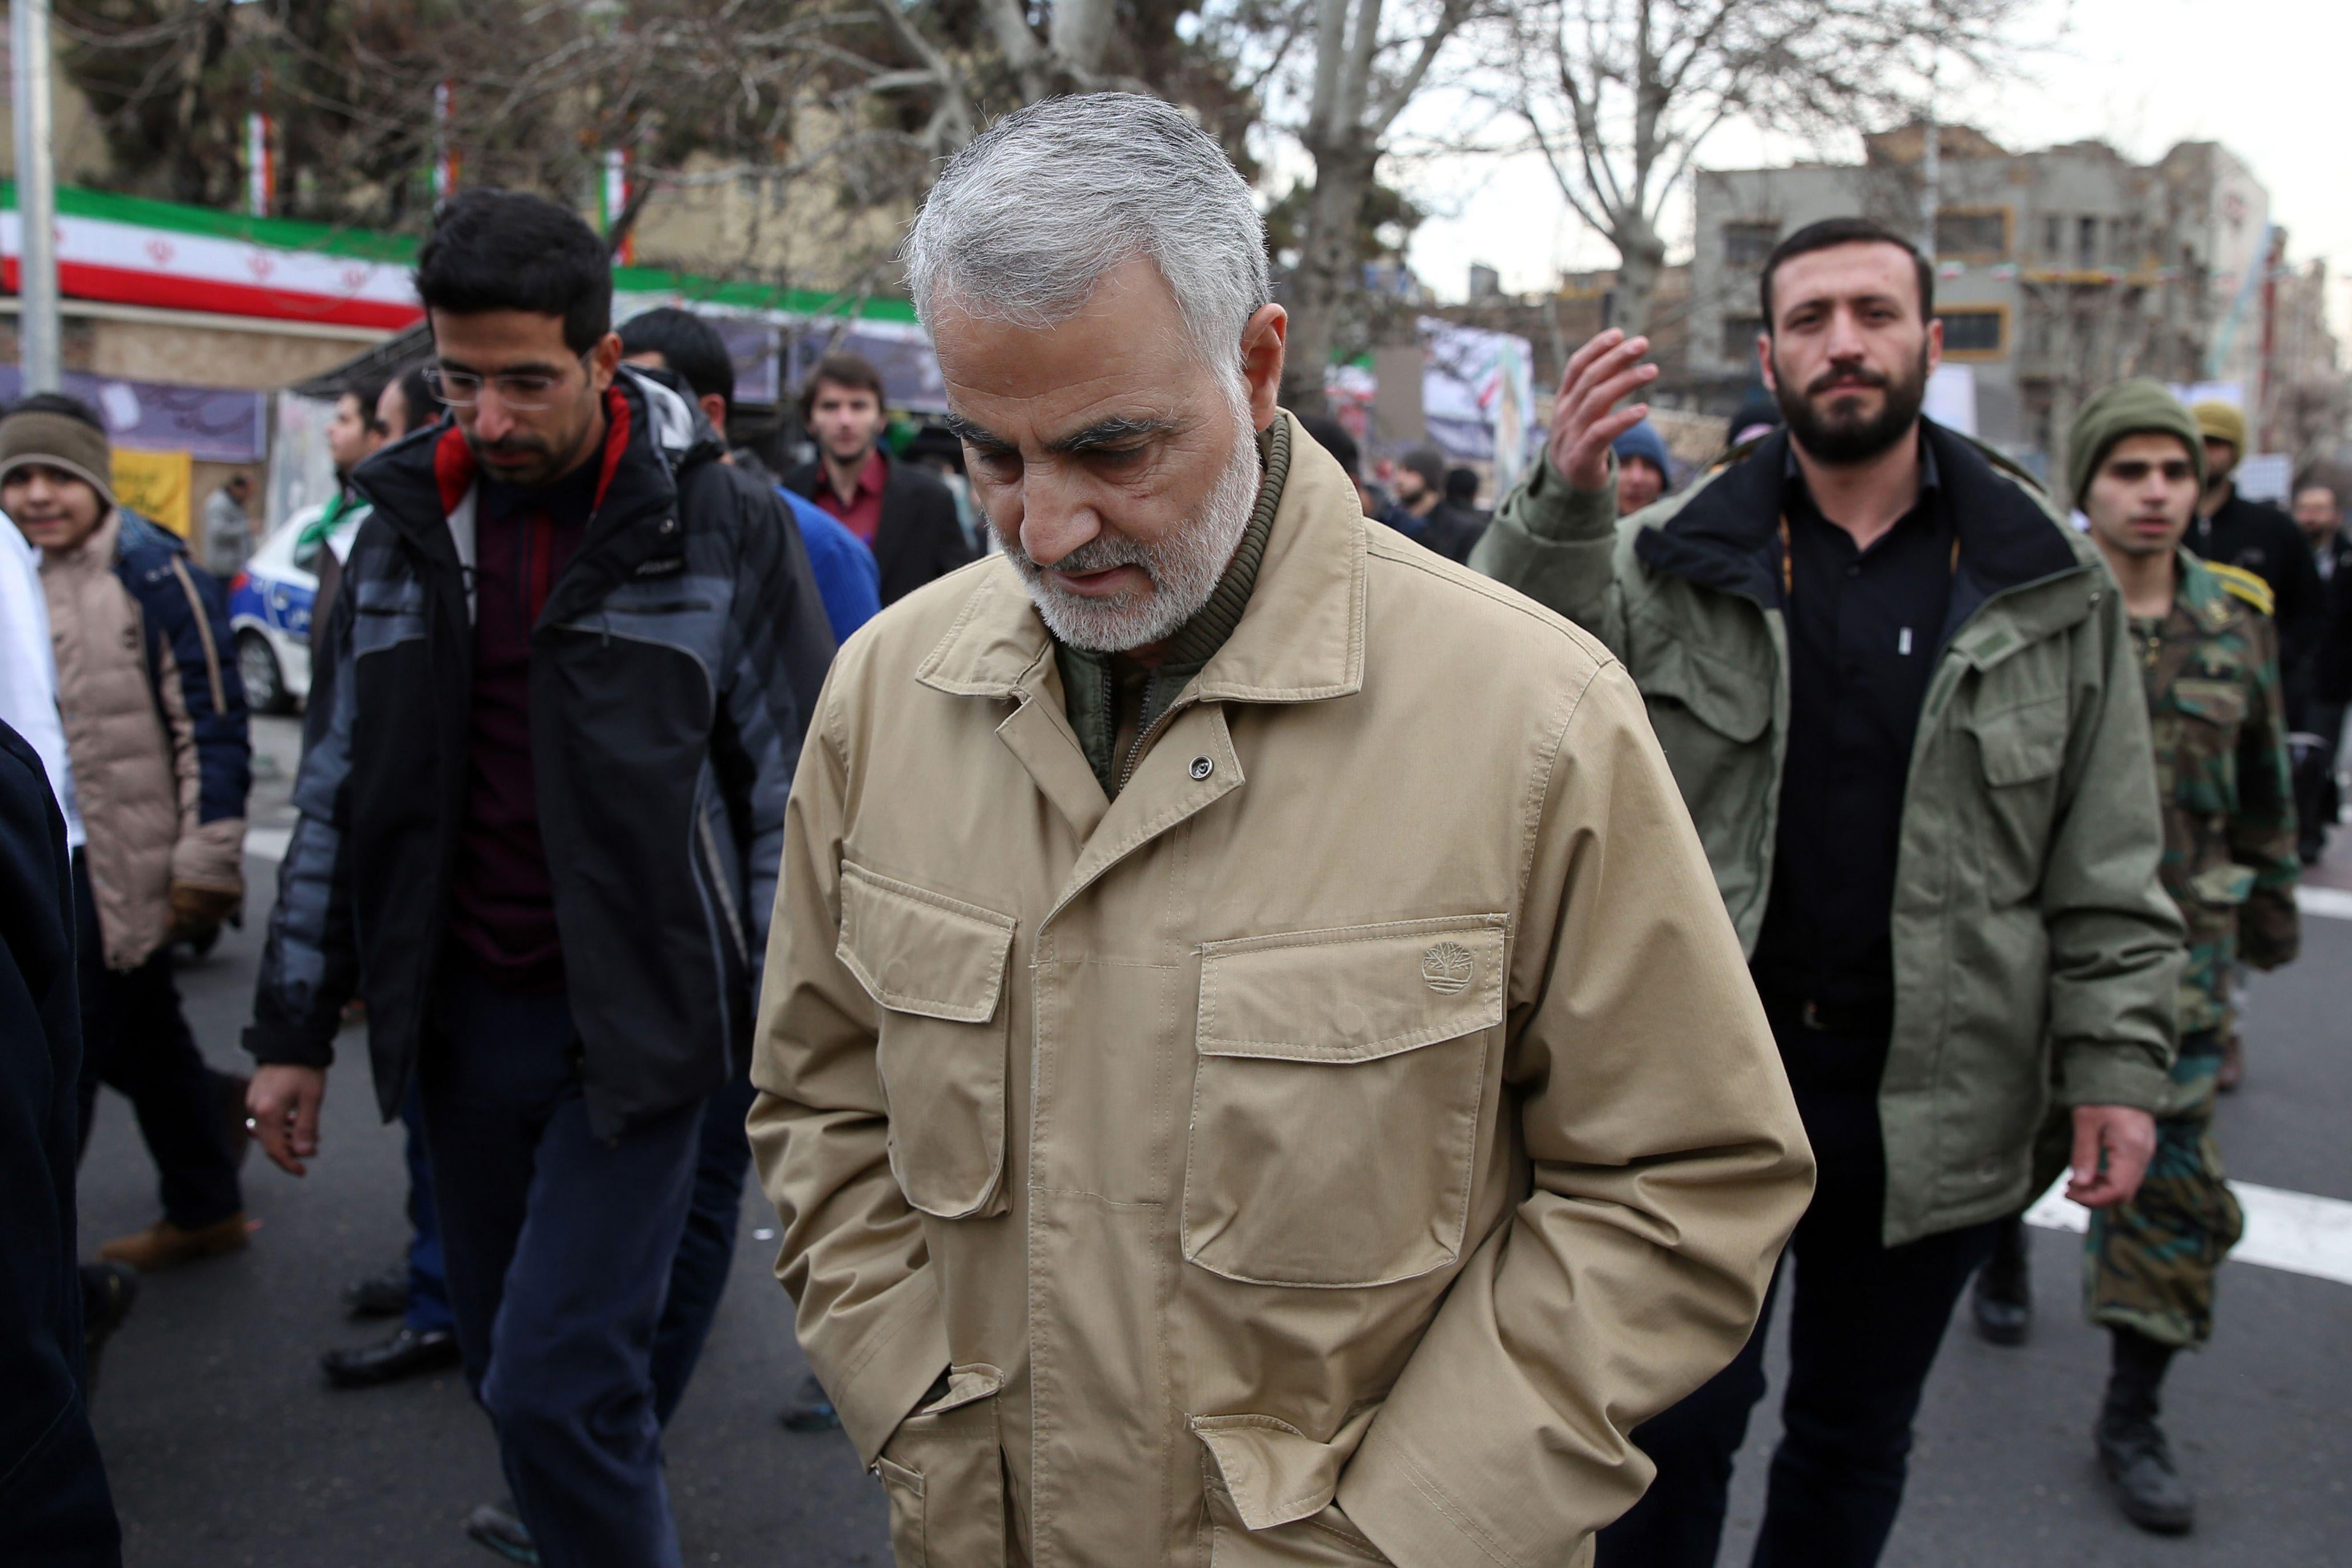 Qassem Soleimani, wearing civilian clothes, walks during a street procession with his eyes down.